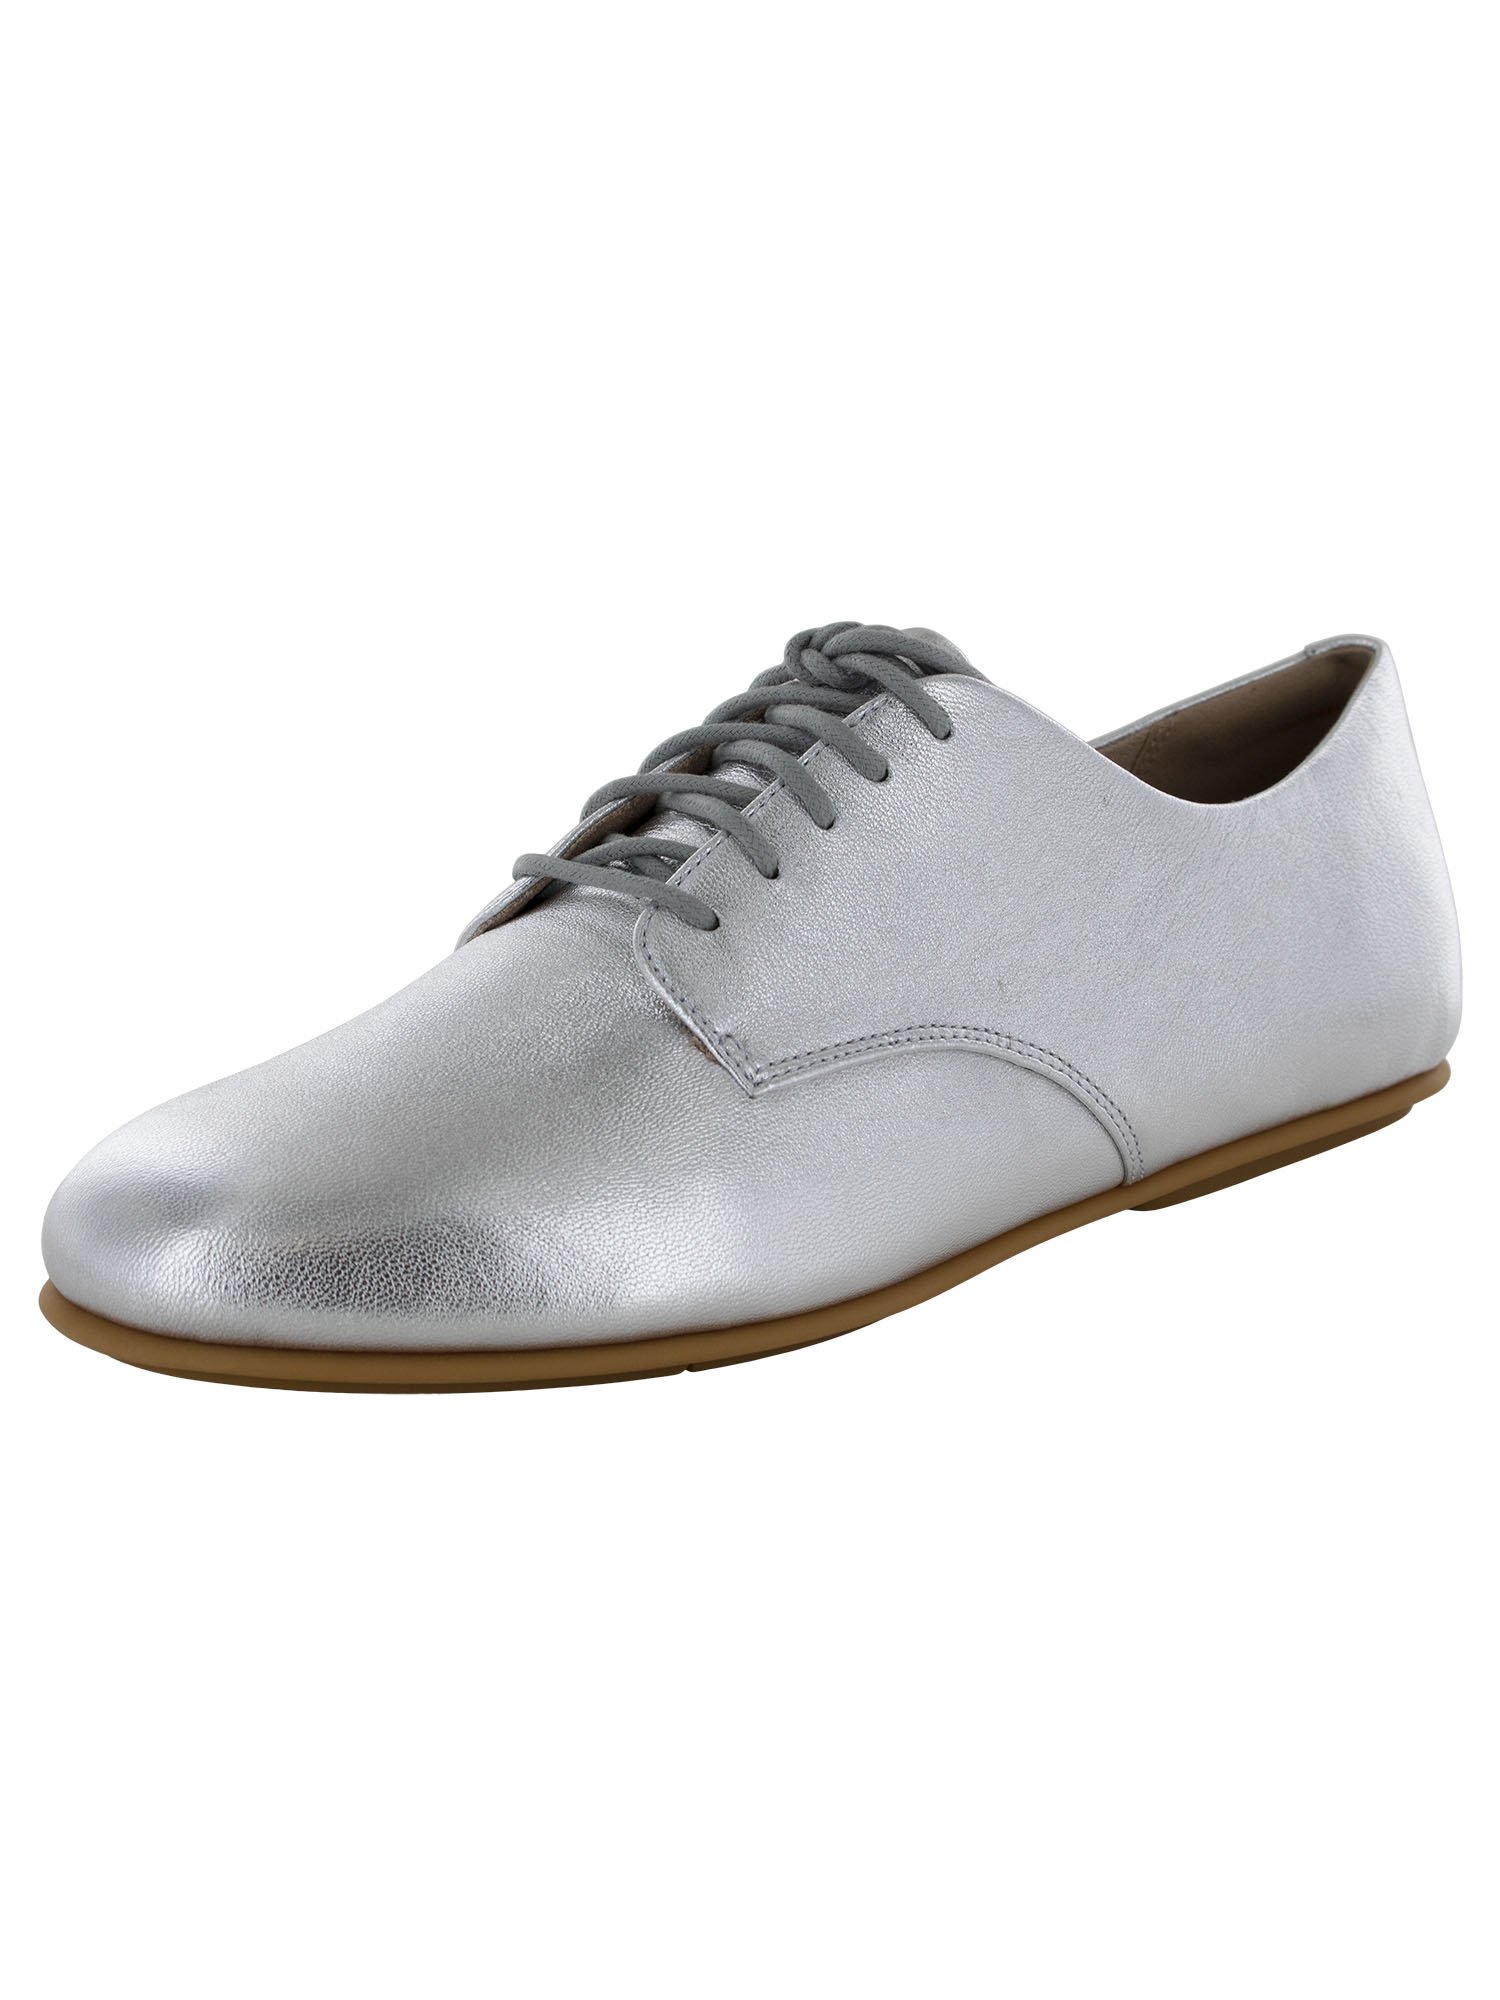 Fitflop Womens Adeola Leather Lace Up Derby Shoes